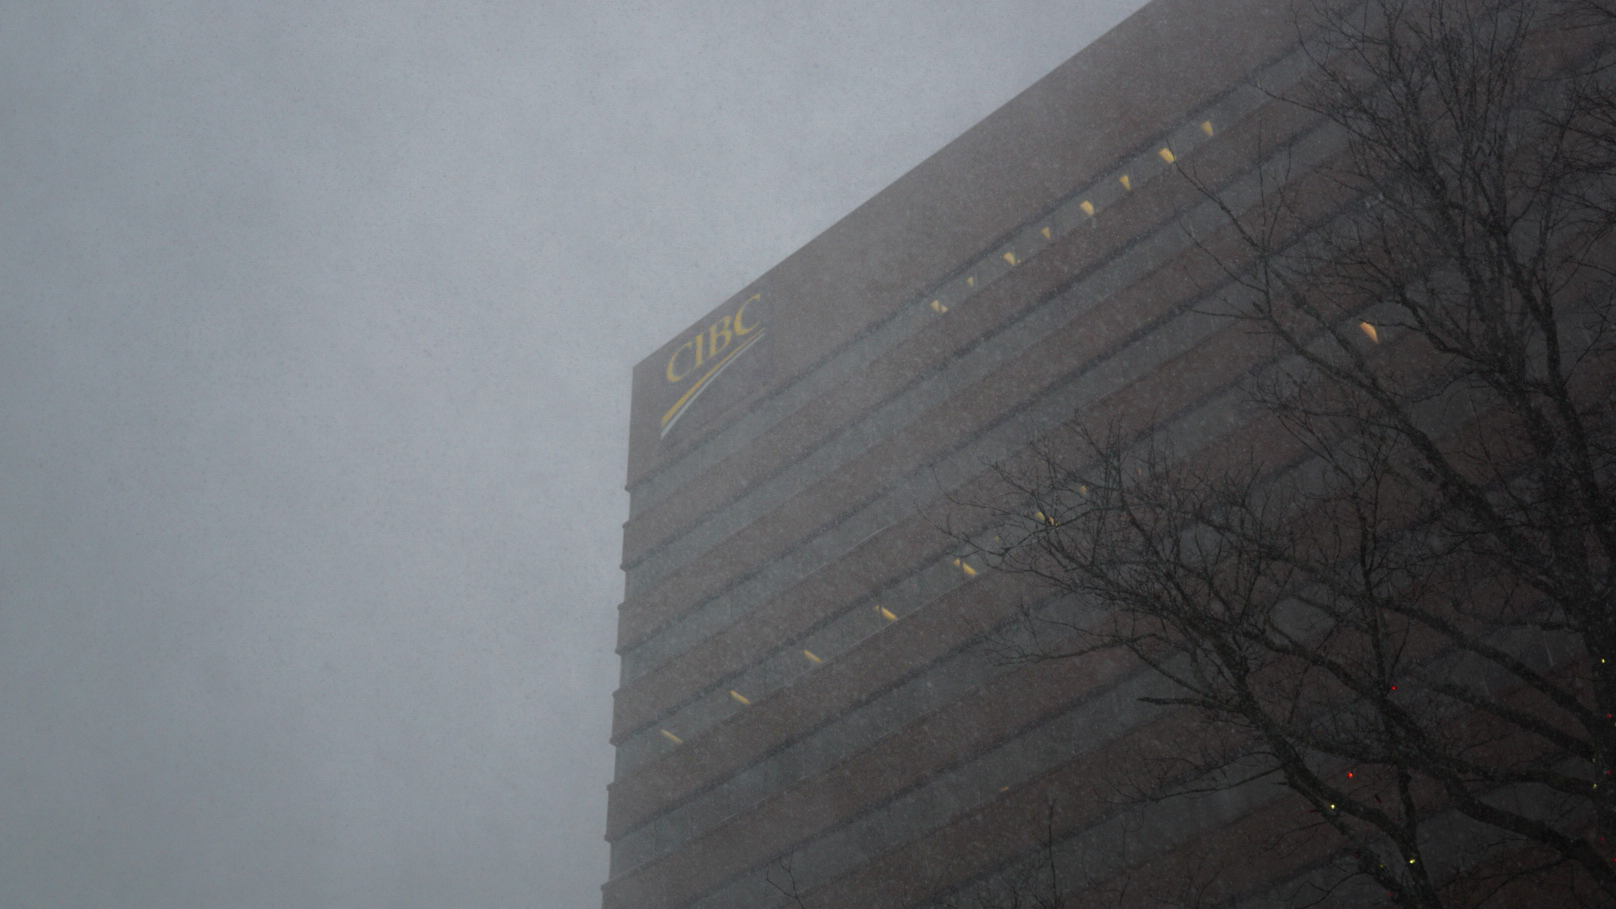 The CIBC building in downtown Halifax is seen through snow.